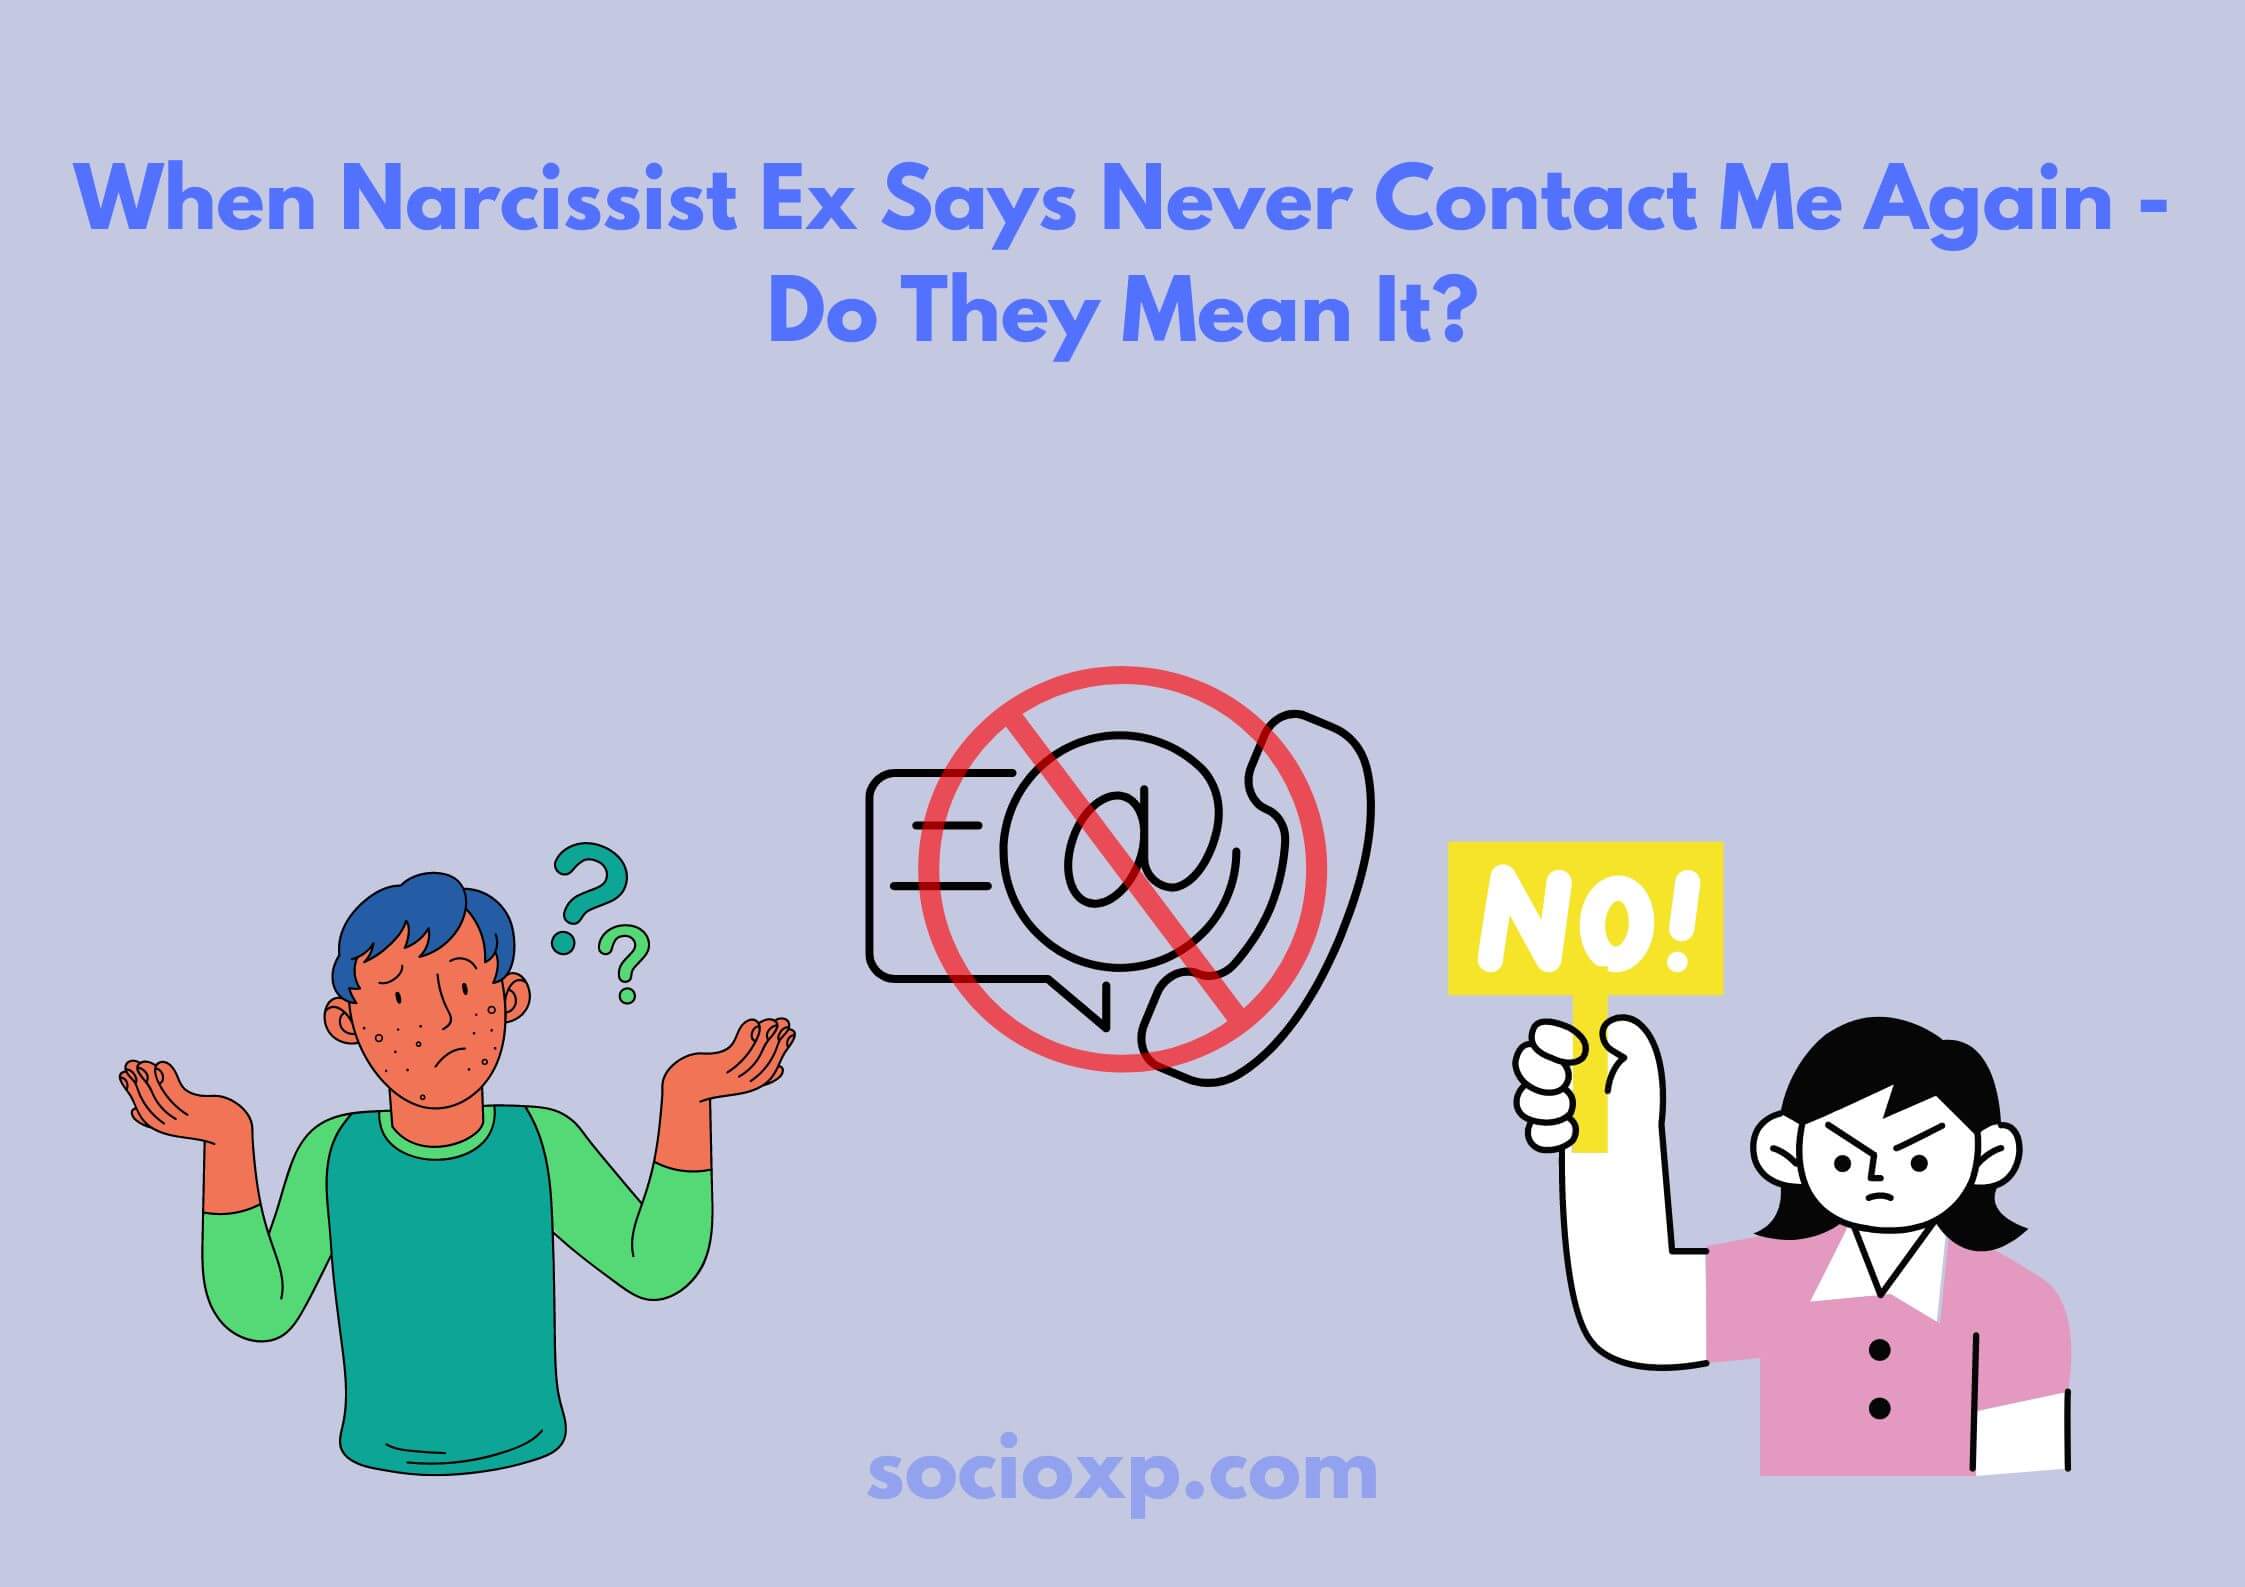 When Narcissist Ex Says Never Contact Me Again - Do They Mean It?